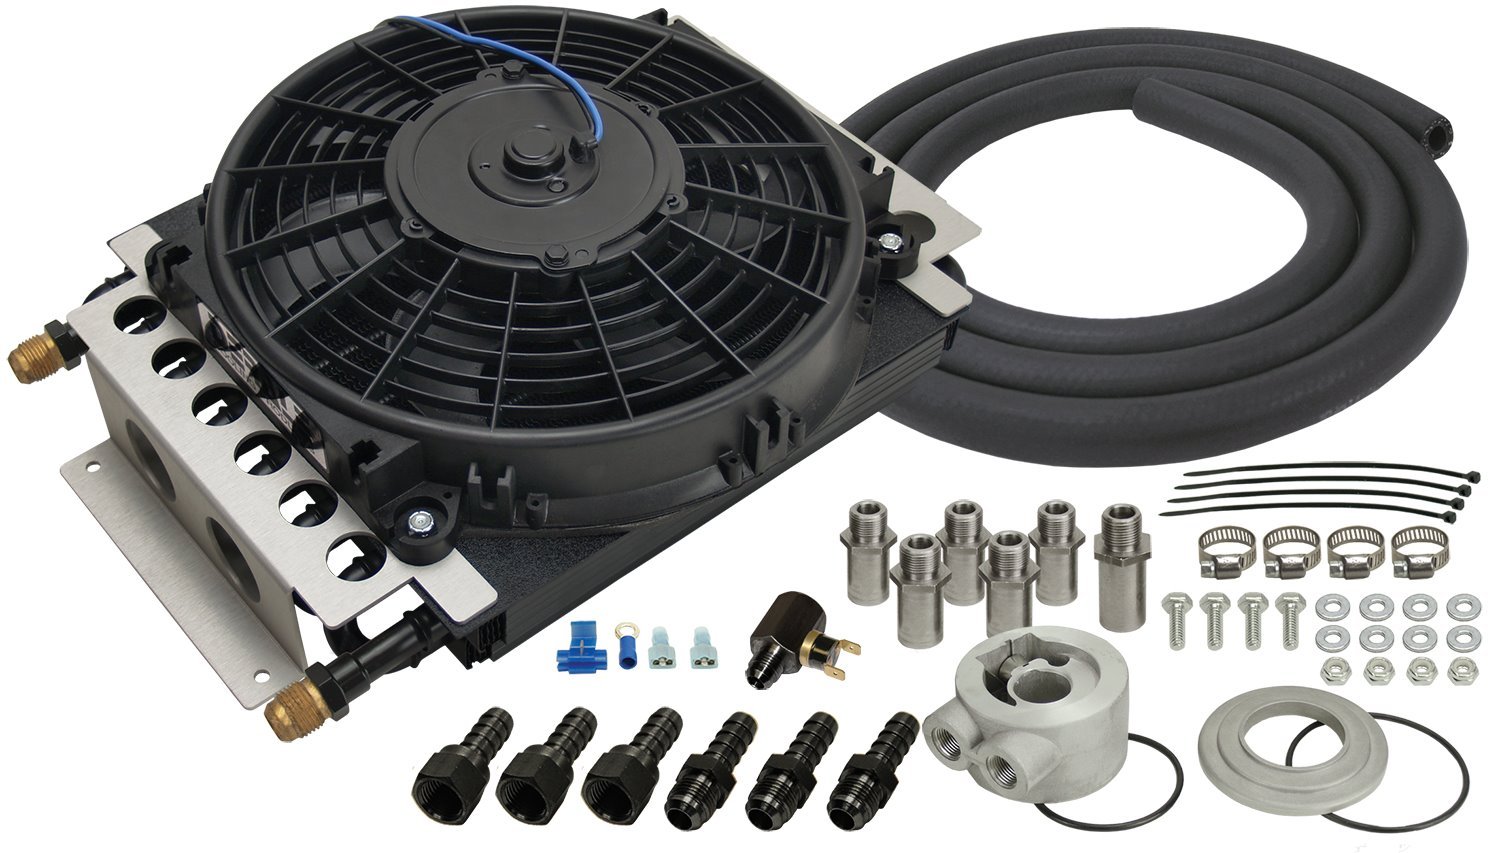 Electra-Cool Engine Oil Cooler Kit Inlet Size: -8AN